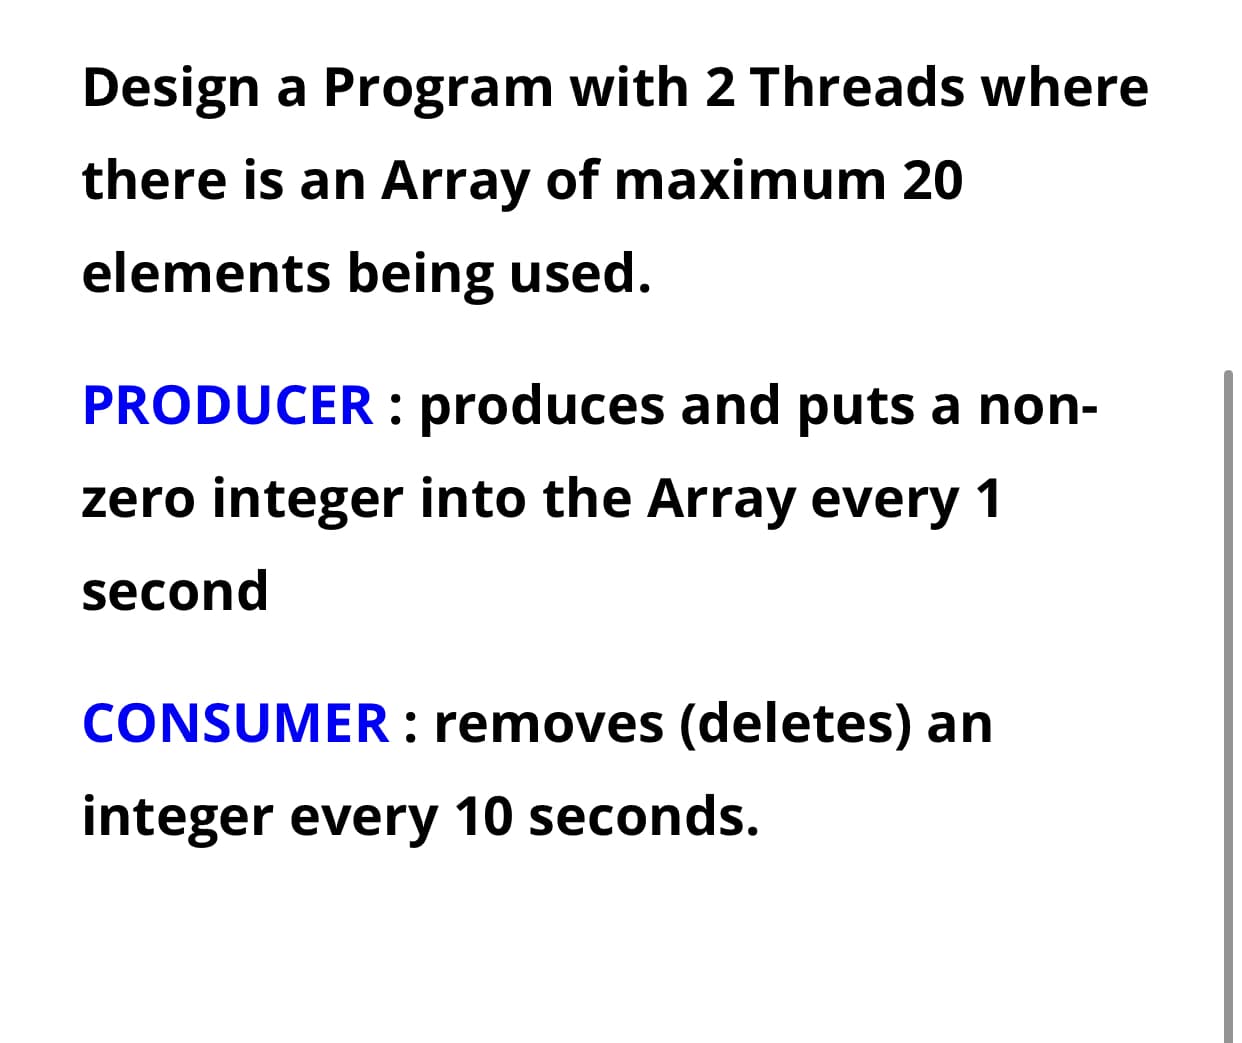 Design a Program with 2 Threads where
there is an Array of maximum 20
elements being used.
PRODUCER produces and puts a non-
zero integer into the Array every 1
second
CONSUMER: removes (deletes) an
integer every 10 seconds.
